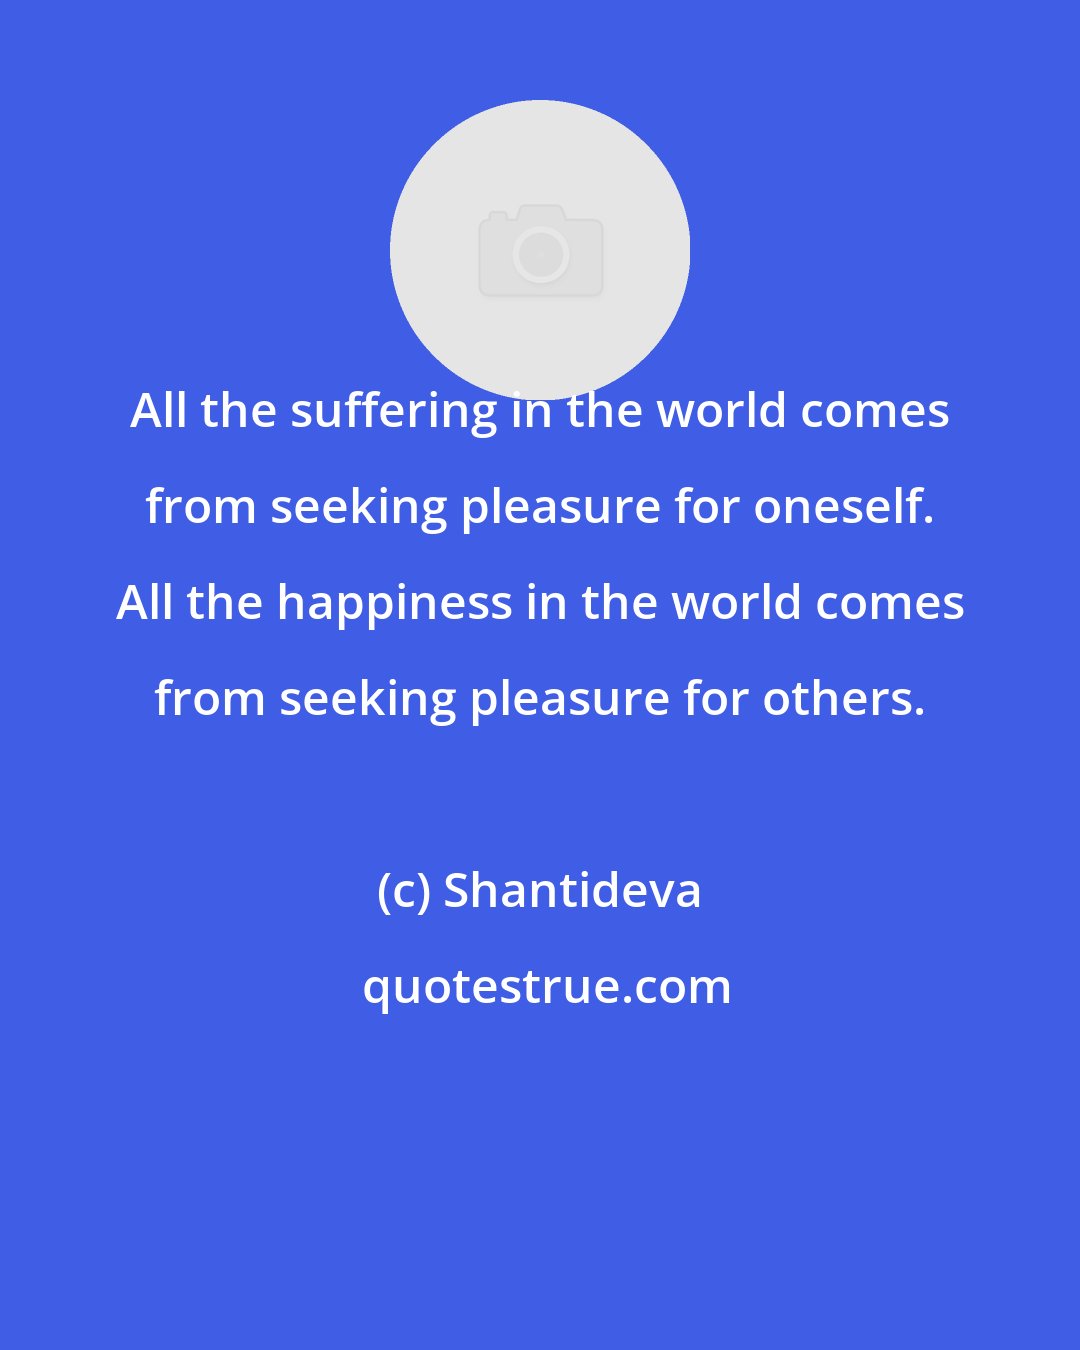 Shantideva: All the suffering in the world comes from seeking pleasure for oneself. All the happiness in the world comes from seeking pleasure for others.